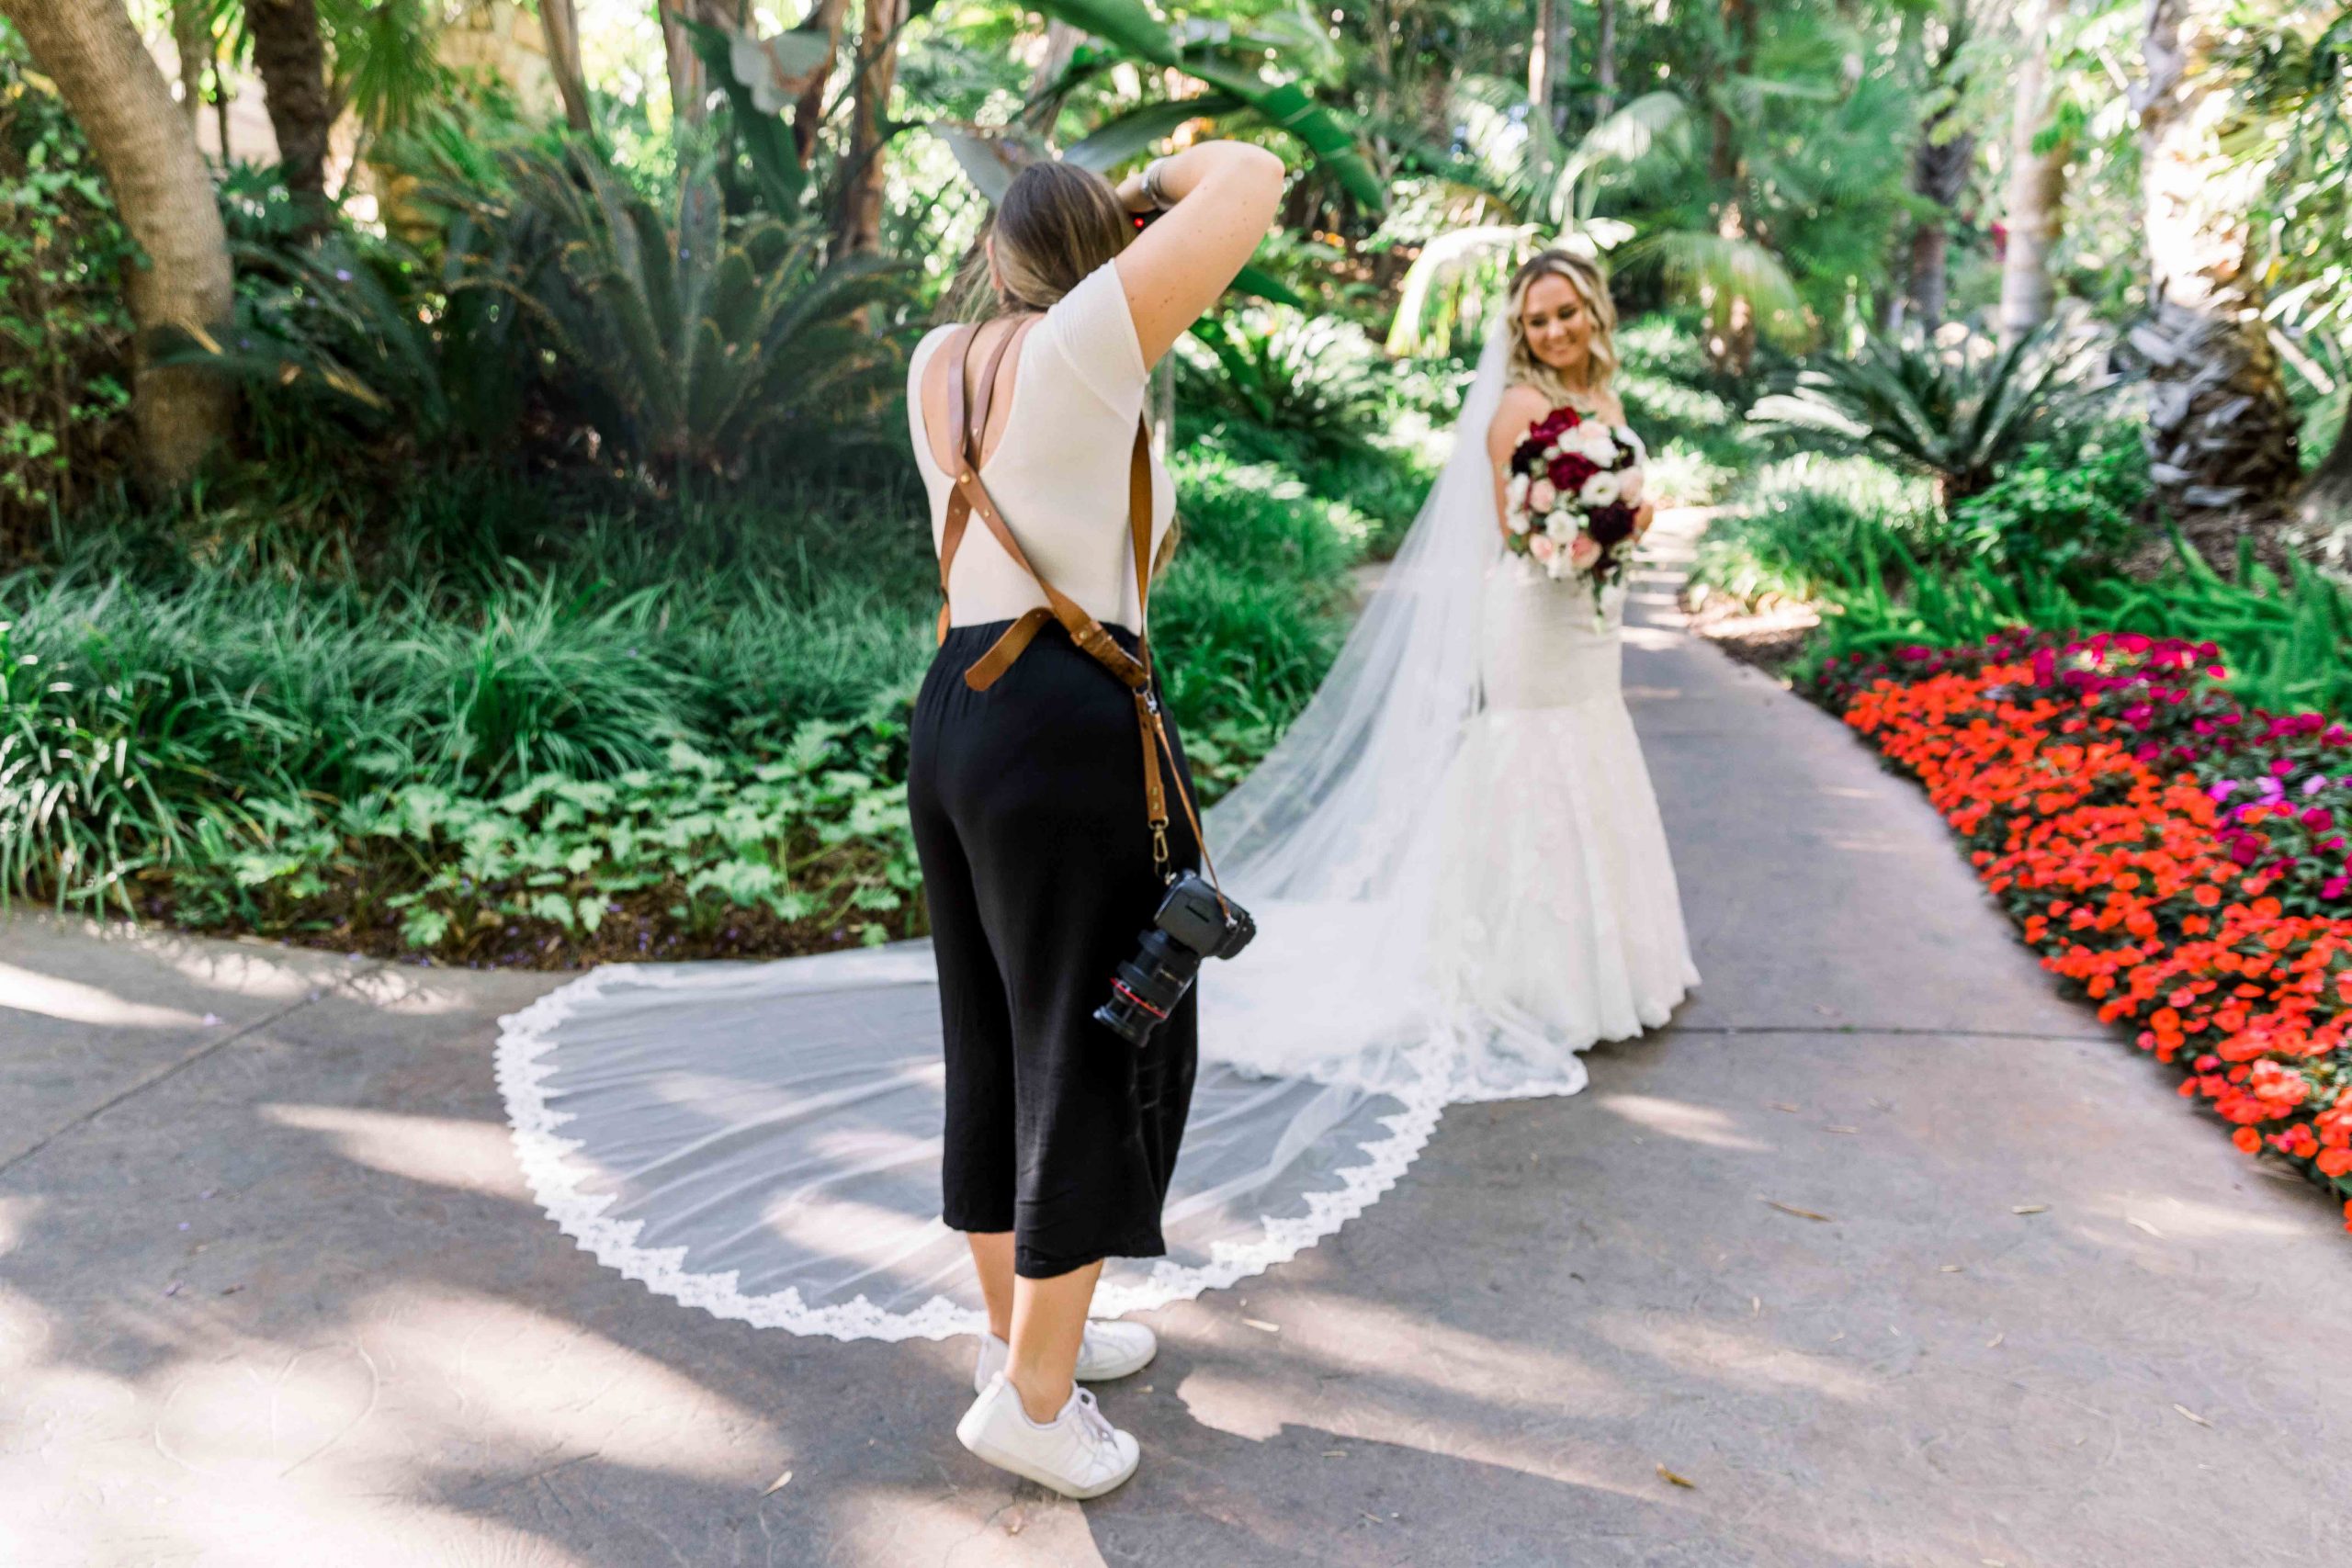 Woman photographer with camera harness taking a photo of a bride with long veil